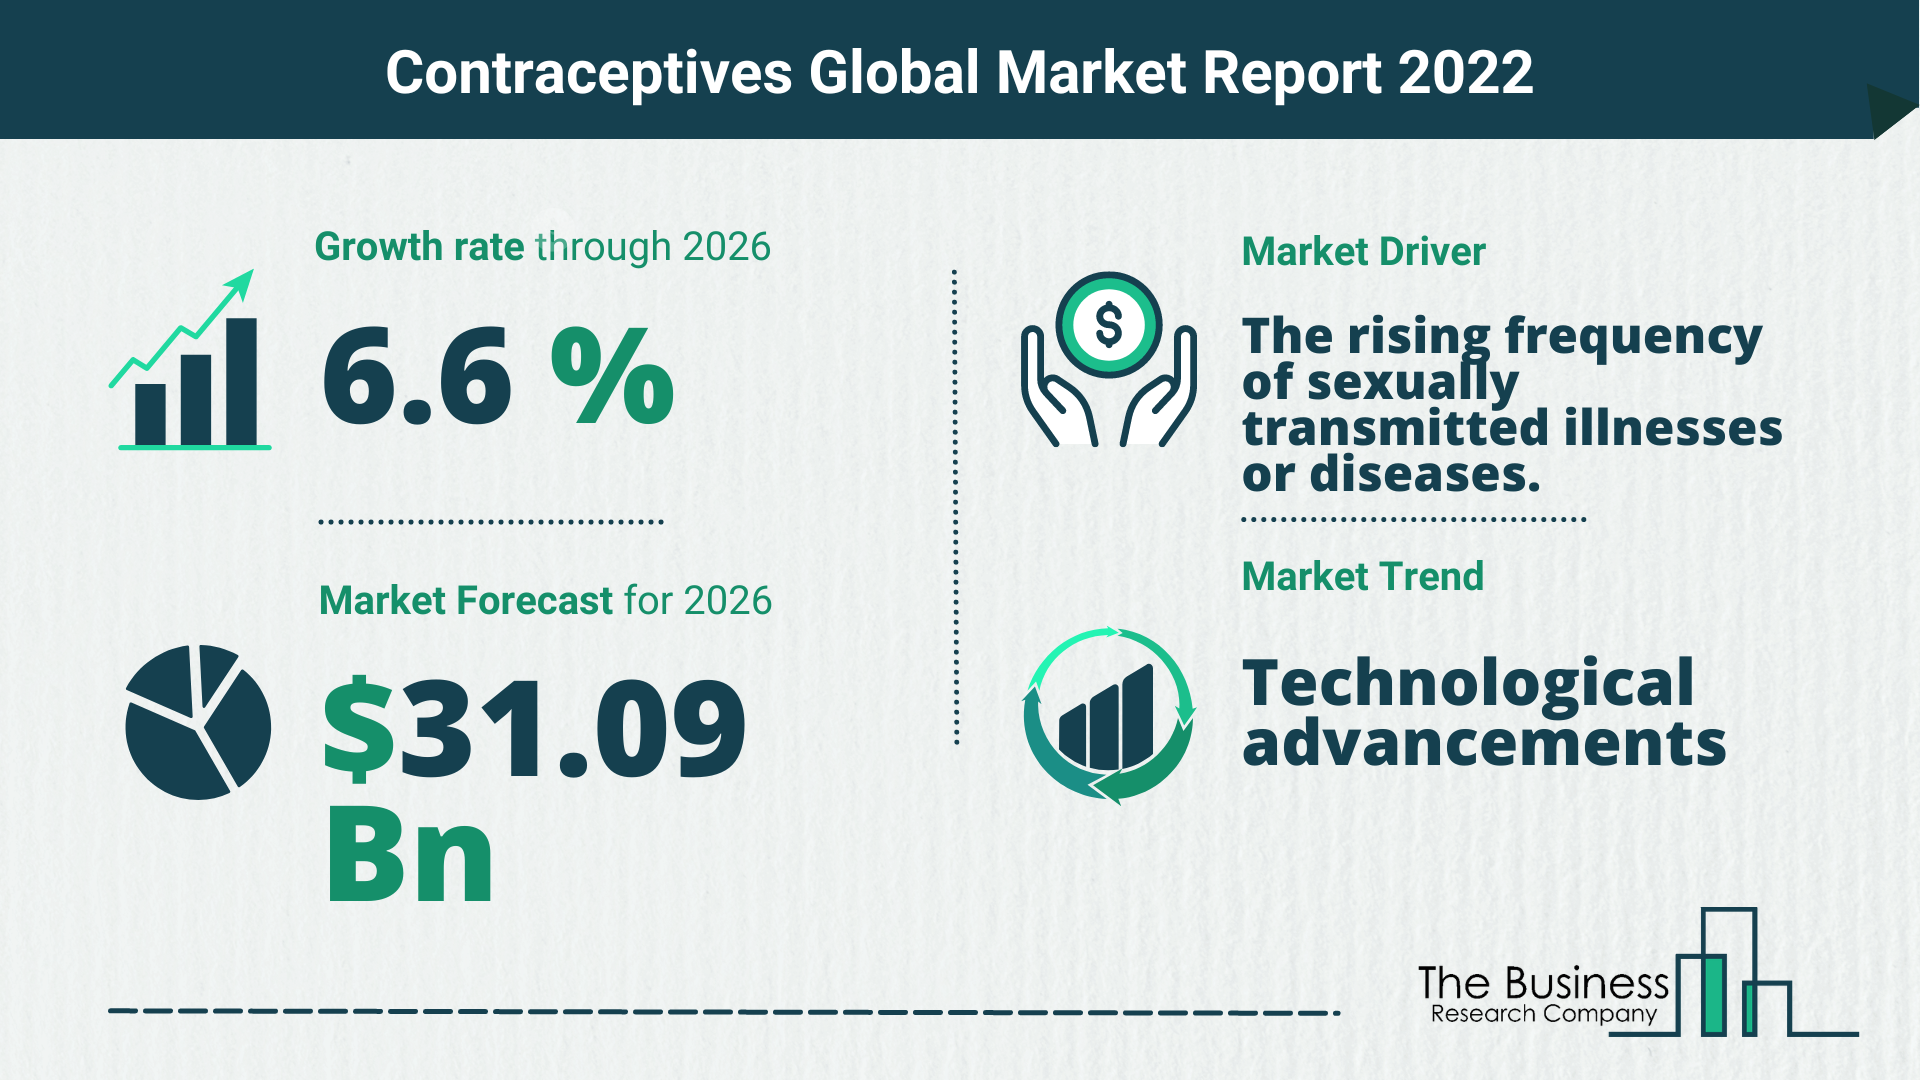 How Will The Contraceptives Market Grow In 2022?